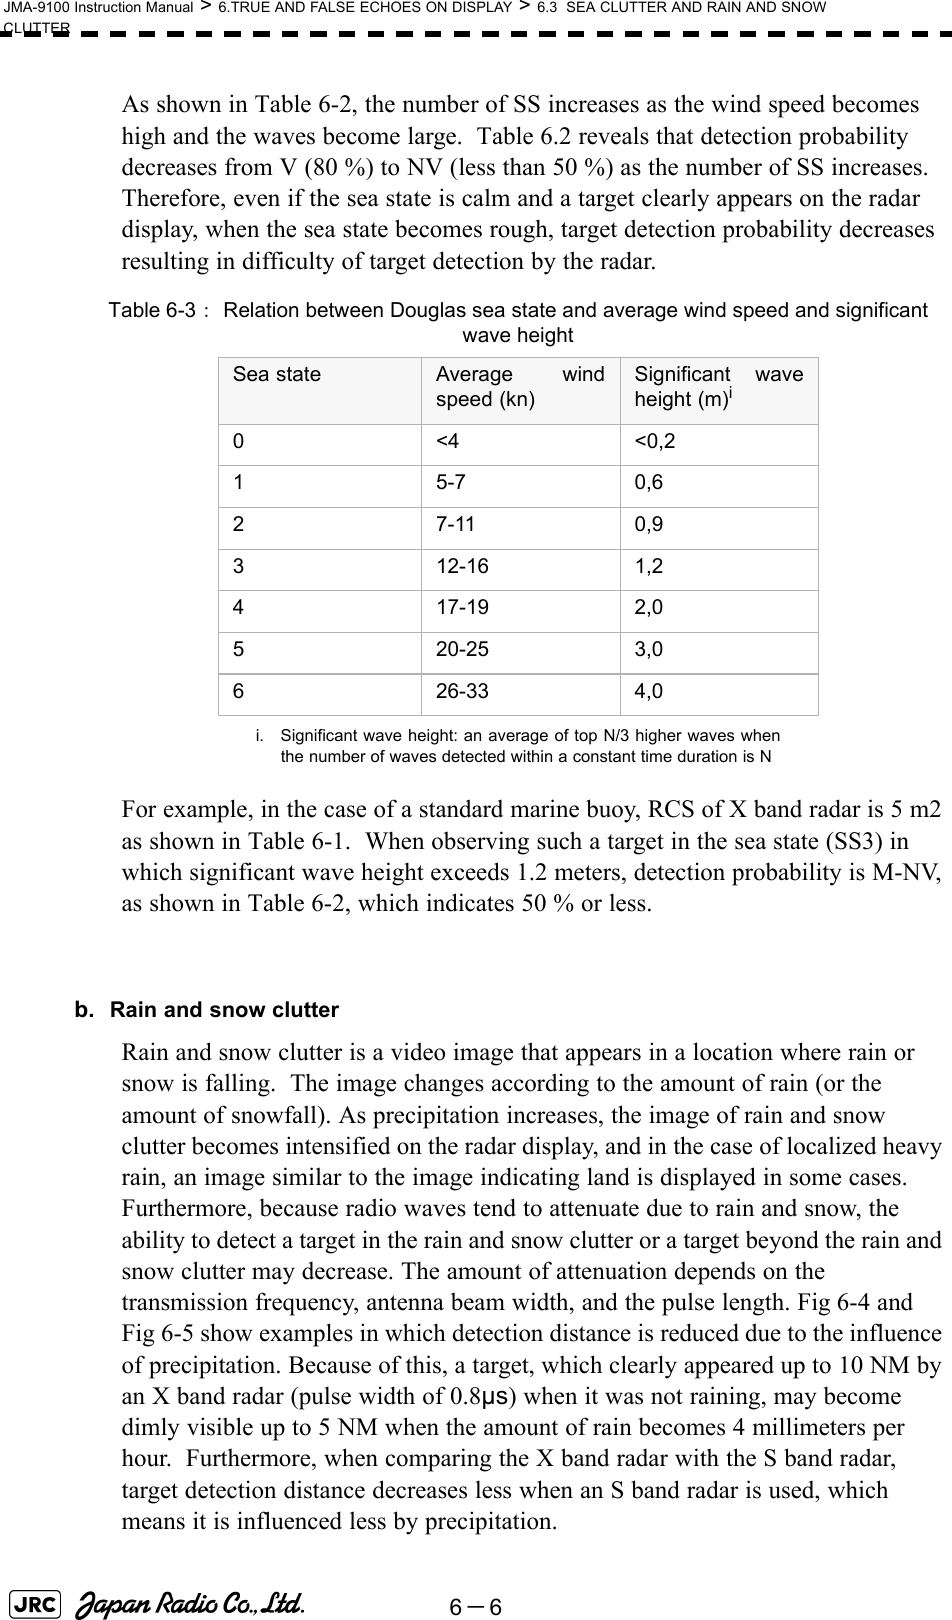 6－6JMA-9100 Instruction Manual &gt; 6.TRUE AND FALSE ECHOES ON DISPLAY &gt; 6.3  SEA CLUTTER AND RAIN AND SNOW CLUTTERAs shown in Table 6-2, the number of SS increases as the wind speed becomes high and the waves become large.  Table 6.2 reveals that detection probability decreases from V (80 %) to NV (less than 50 %) as the number of SS increases. Therefore, even if the sea state is calm and a target clearly appears on the radar display, when the sea state becomes rough, target detection probability decreases resulting in difficulty of target detection by the radar.For example, in the case of a standard marine buoy, RCS of X band radar is 5 m2 as shown in Table 6-1.  When observing such a target in the sea state (SS3) in which significant wave height exceeds 1.2 meters, detection probability is M-NV, as shown in Table 6-2, which indicates 50 % or less. b. Rain and snow clutterRain and snow clutter is a video image that appears in a location where rain or snow is falling.  The image changes according to the amount of rain (or the amount of snowfall). As precipitation increases, the image of rain and snow clutter becomes intensified on the radar display, and in the case of localized heavy rain, an image similar to the image indicating land is displayed in some cases. Furthermore, because radio waves tend to attenuate due to rain and snow, the ability to detect a target in the rain and snow clutter or a target beyond the rain and snow clutter may decrease. The amount of attenuation depends on the transmission frequency, antenna beam width, and the pulse length. Fig 6-4 and Fig 6-5 show examples in which detection distance is reduced due to the influence of precipitation. Because of this, a target, which clearly appeared up to 10 NM by an X band radar (pulse width of 0.8μs) when it was not raining, may become dimly visible up to 5 NM when the amount of rain becomes 4 millimeters per hour.  Furthermore, when comparing the X band radar with the S band radar, target detection distance decreases less when an S band radar is used, which means it is influenced less by precipitation.Table 6-3：  Relation between Douglas sea state and average wind speed and significant wave heightSea state Average windspeed (kn)Significant waveheight (m)ii. Significant wave height: an average of top N/3 higher waves whenthe number of waves detected within a constant time duration is N0&lt;4&lt;0,215-70,627-110,93 12-16 1,24 17-19 2,05 20-25 3,06 26-33 4,0